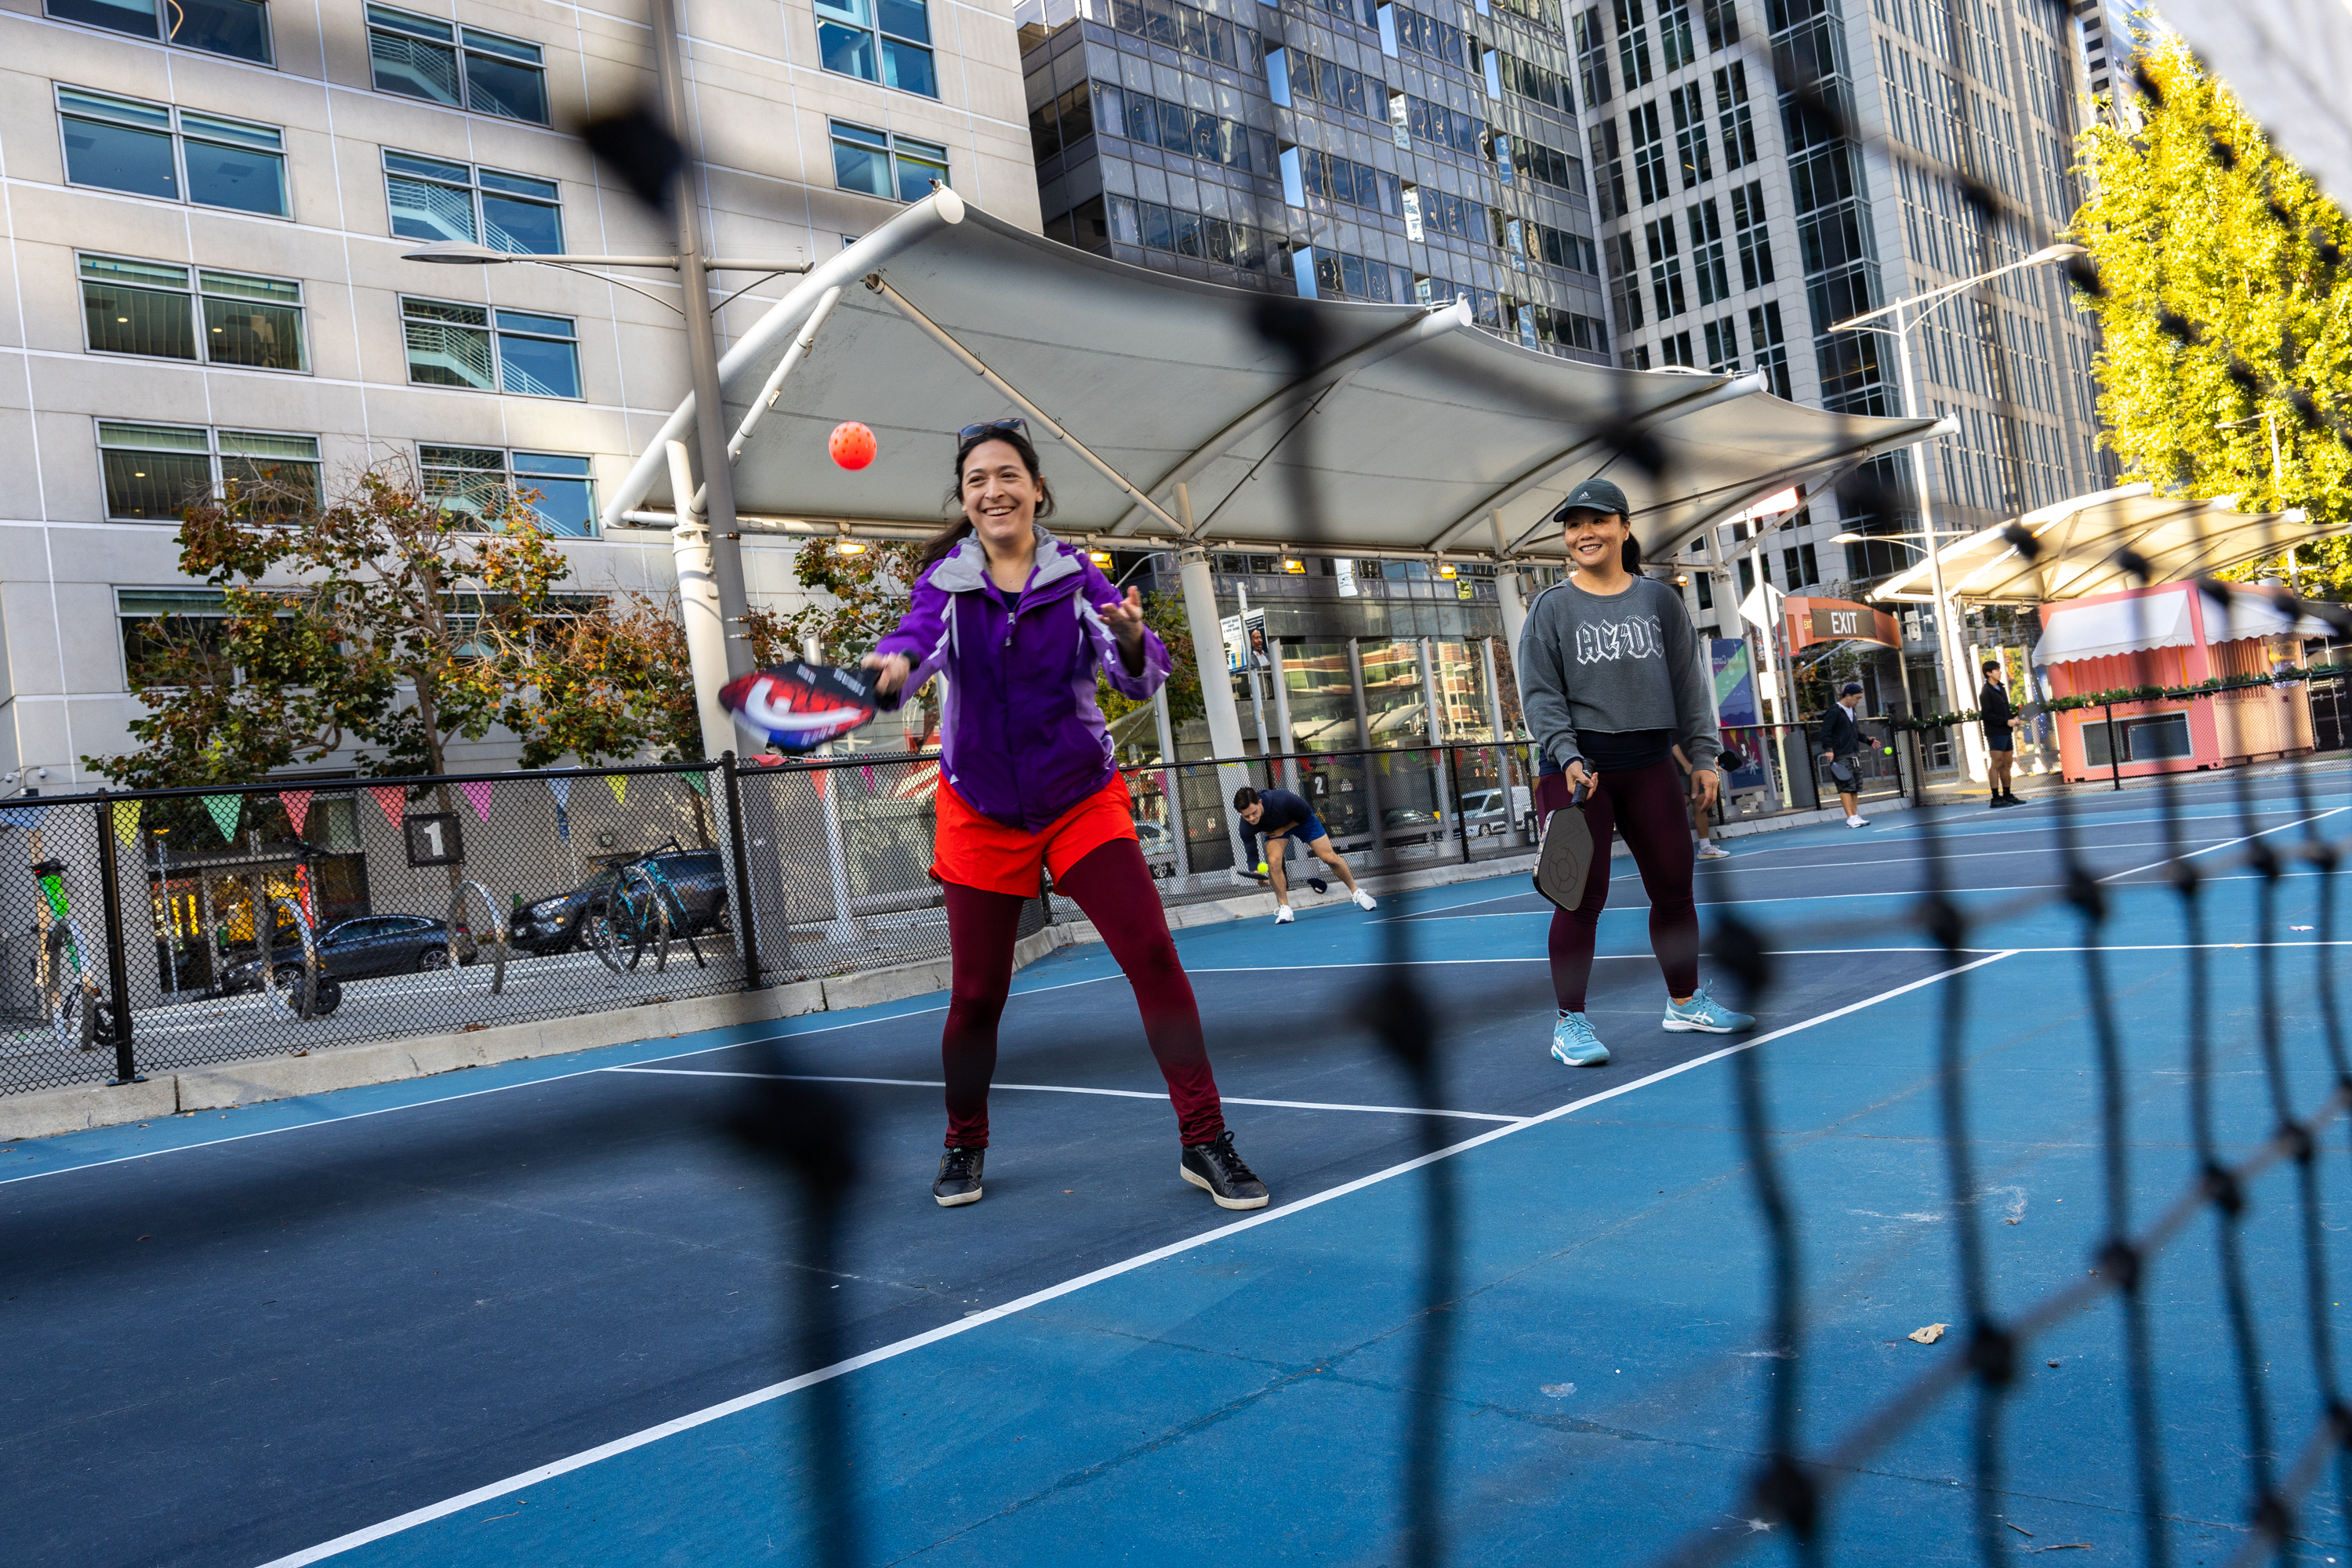 Two people playing pickleball on an urban court, smiling, with buildings in the background.